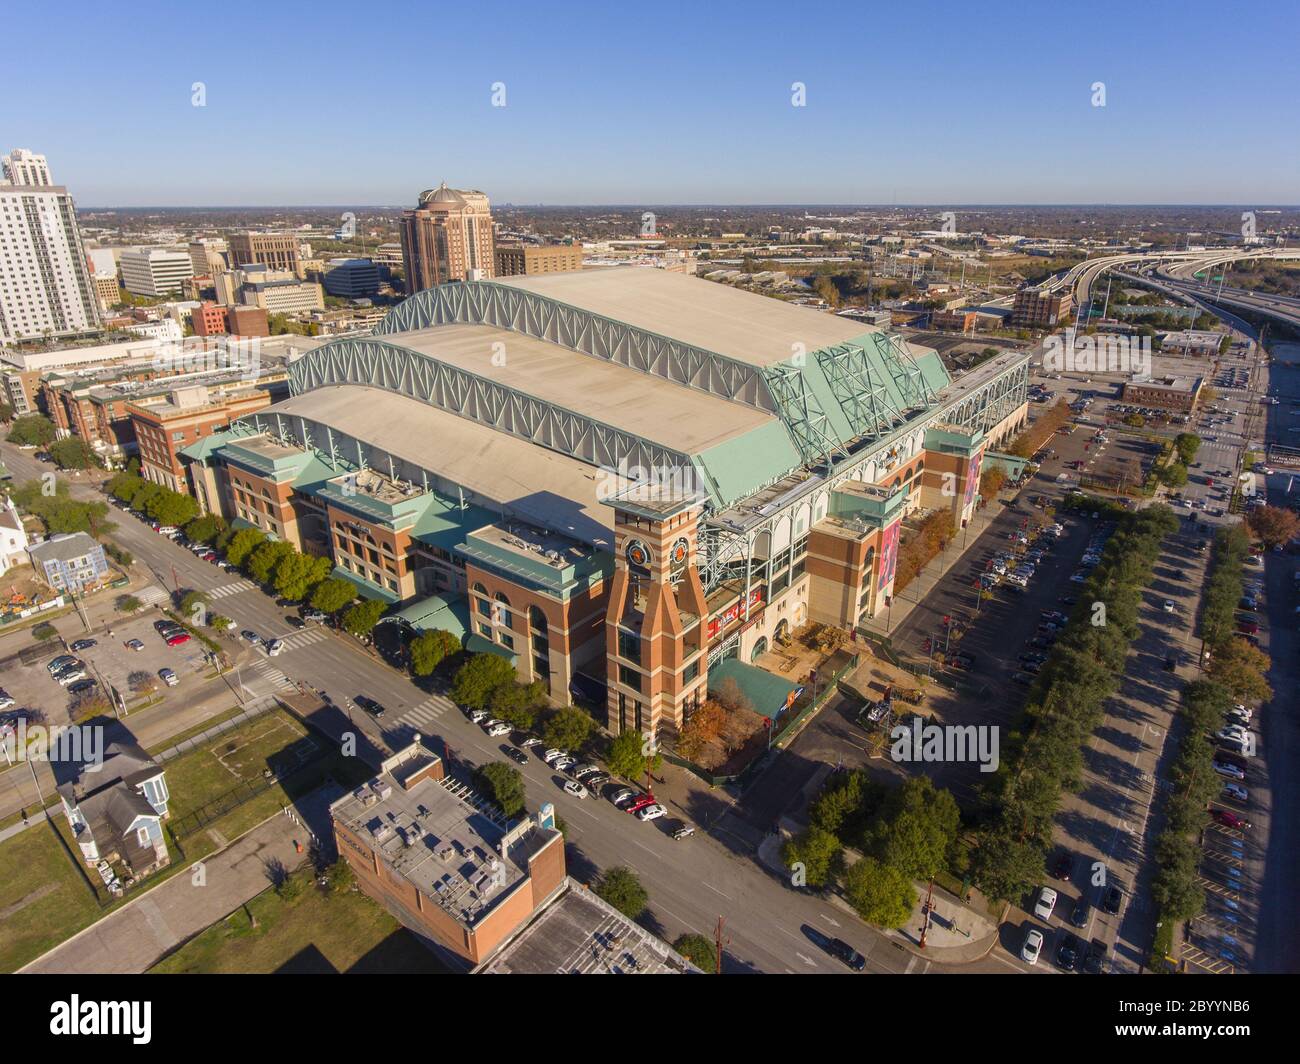 Minute maid park aerial hi-res stock photography and images - Alamy